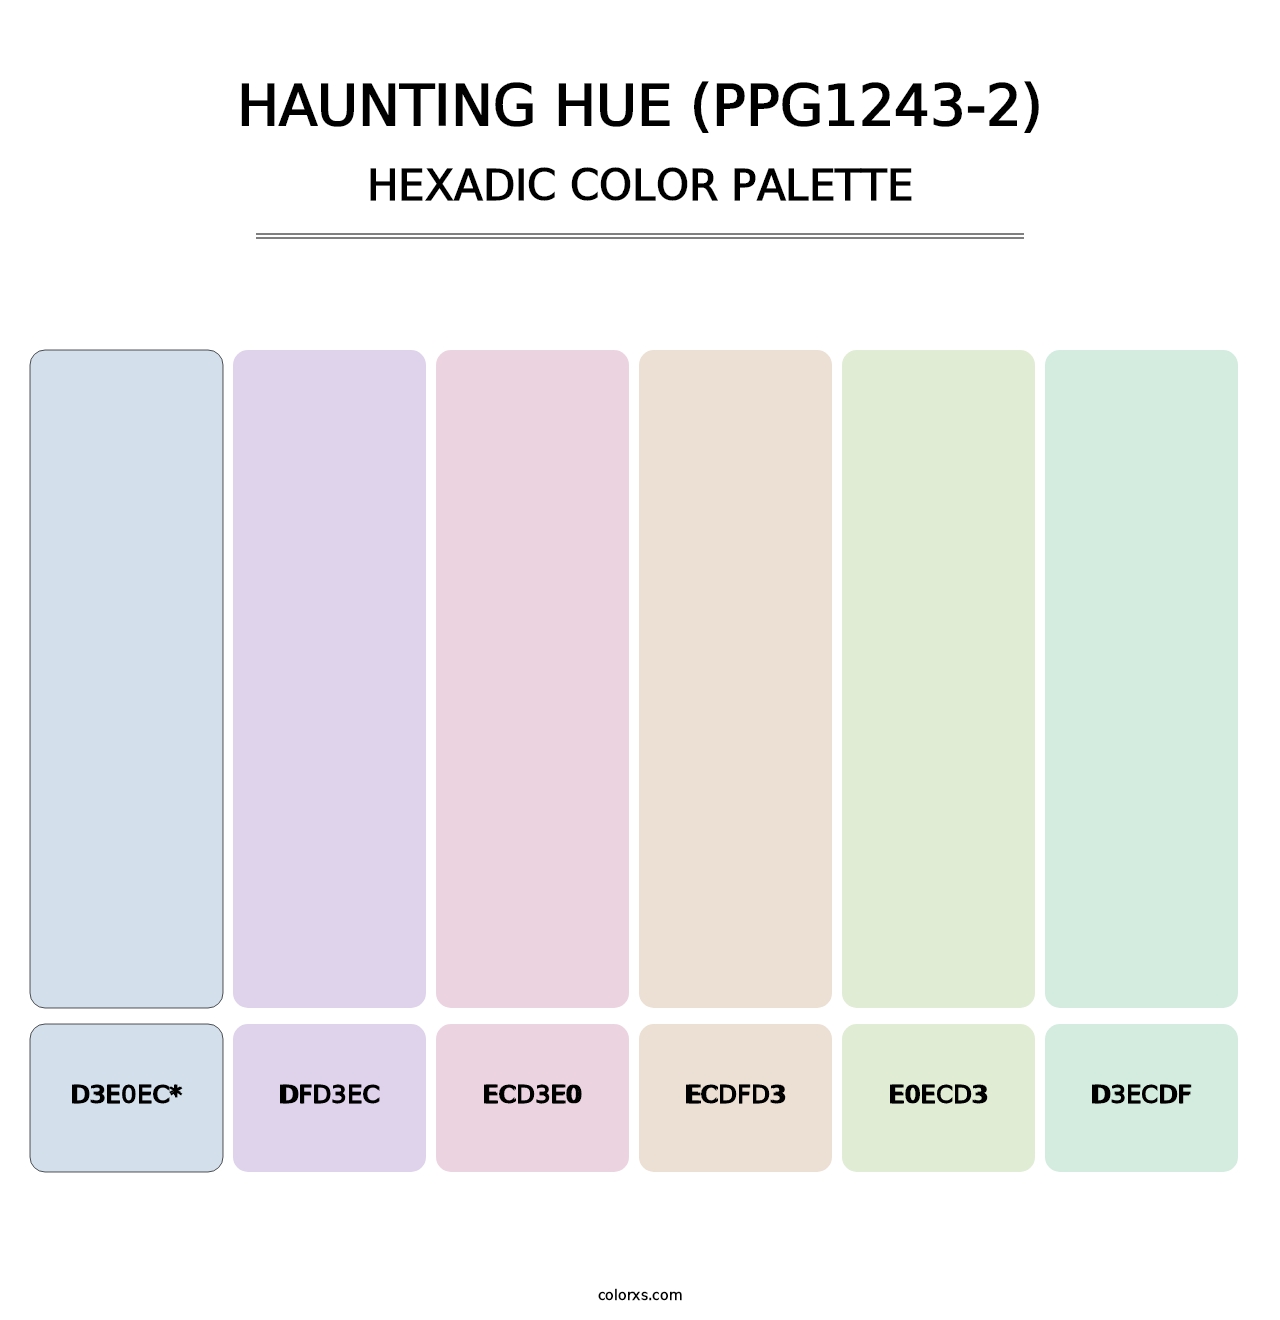 Haunting Hue (PPG1243-2) - Hexadic Color Palette